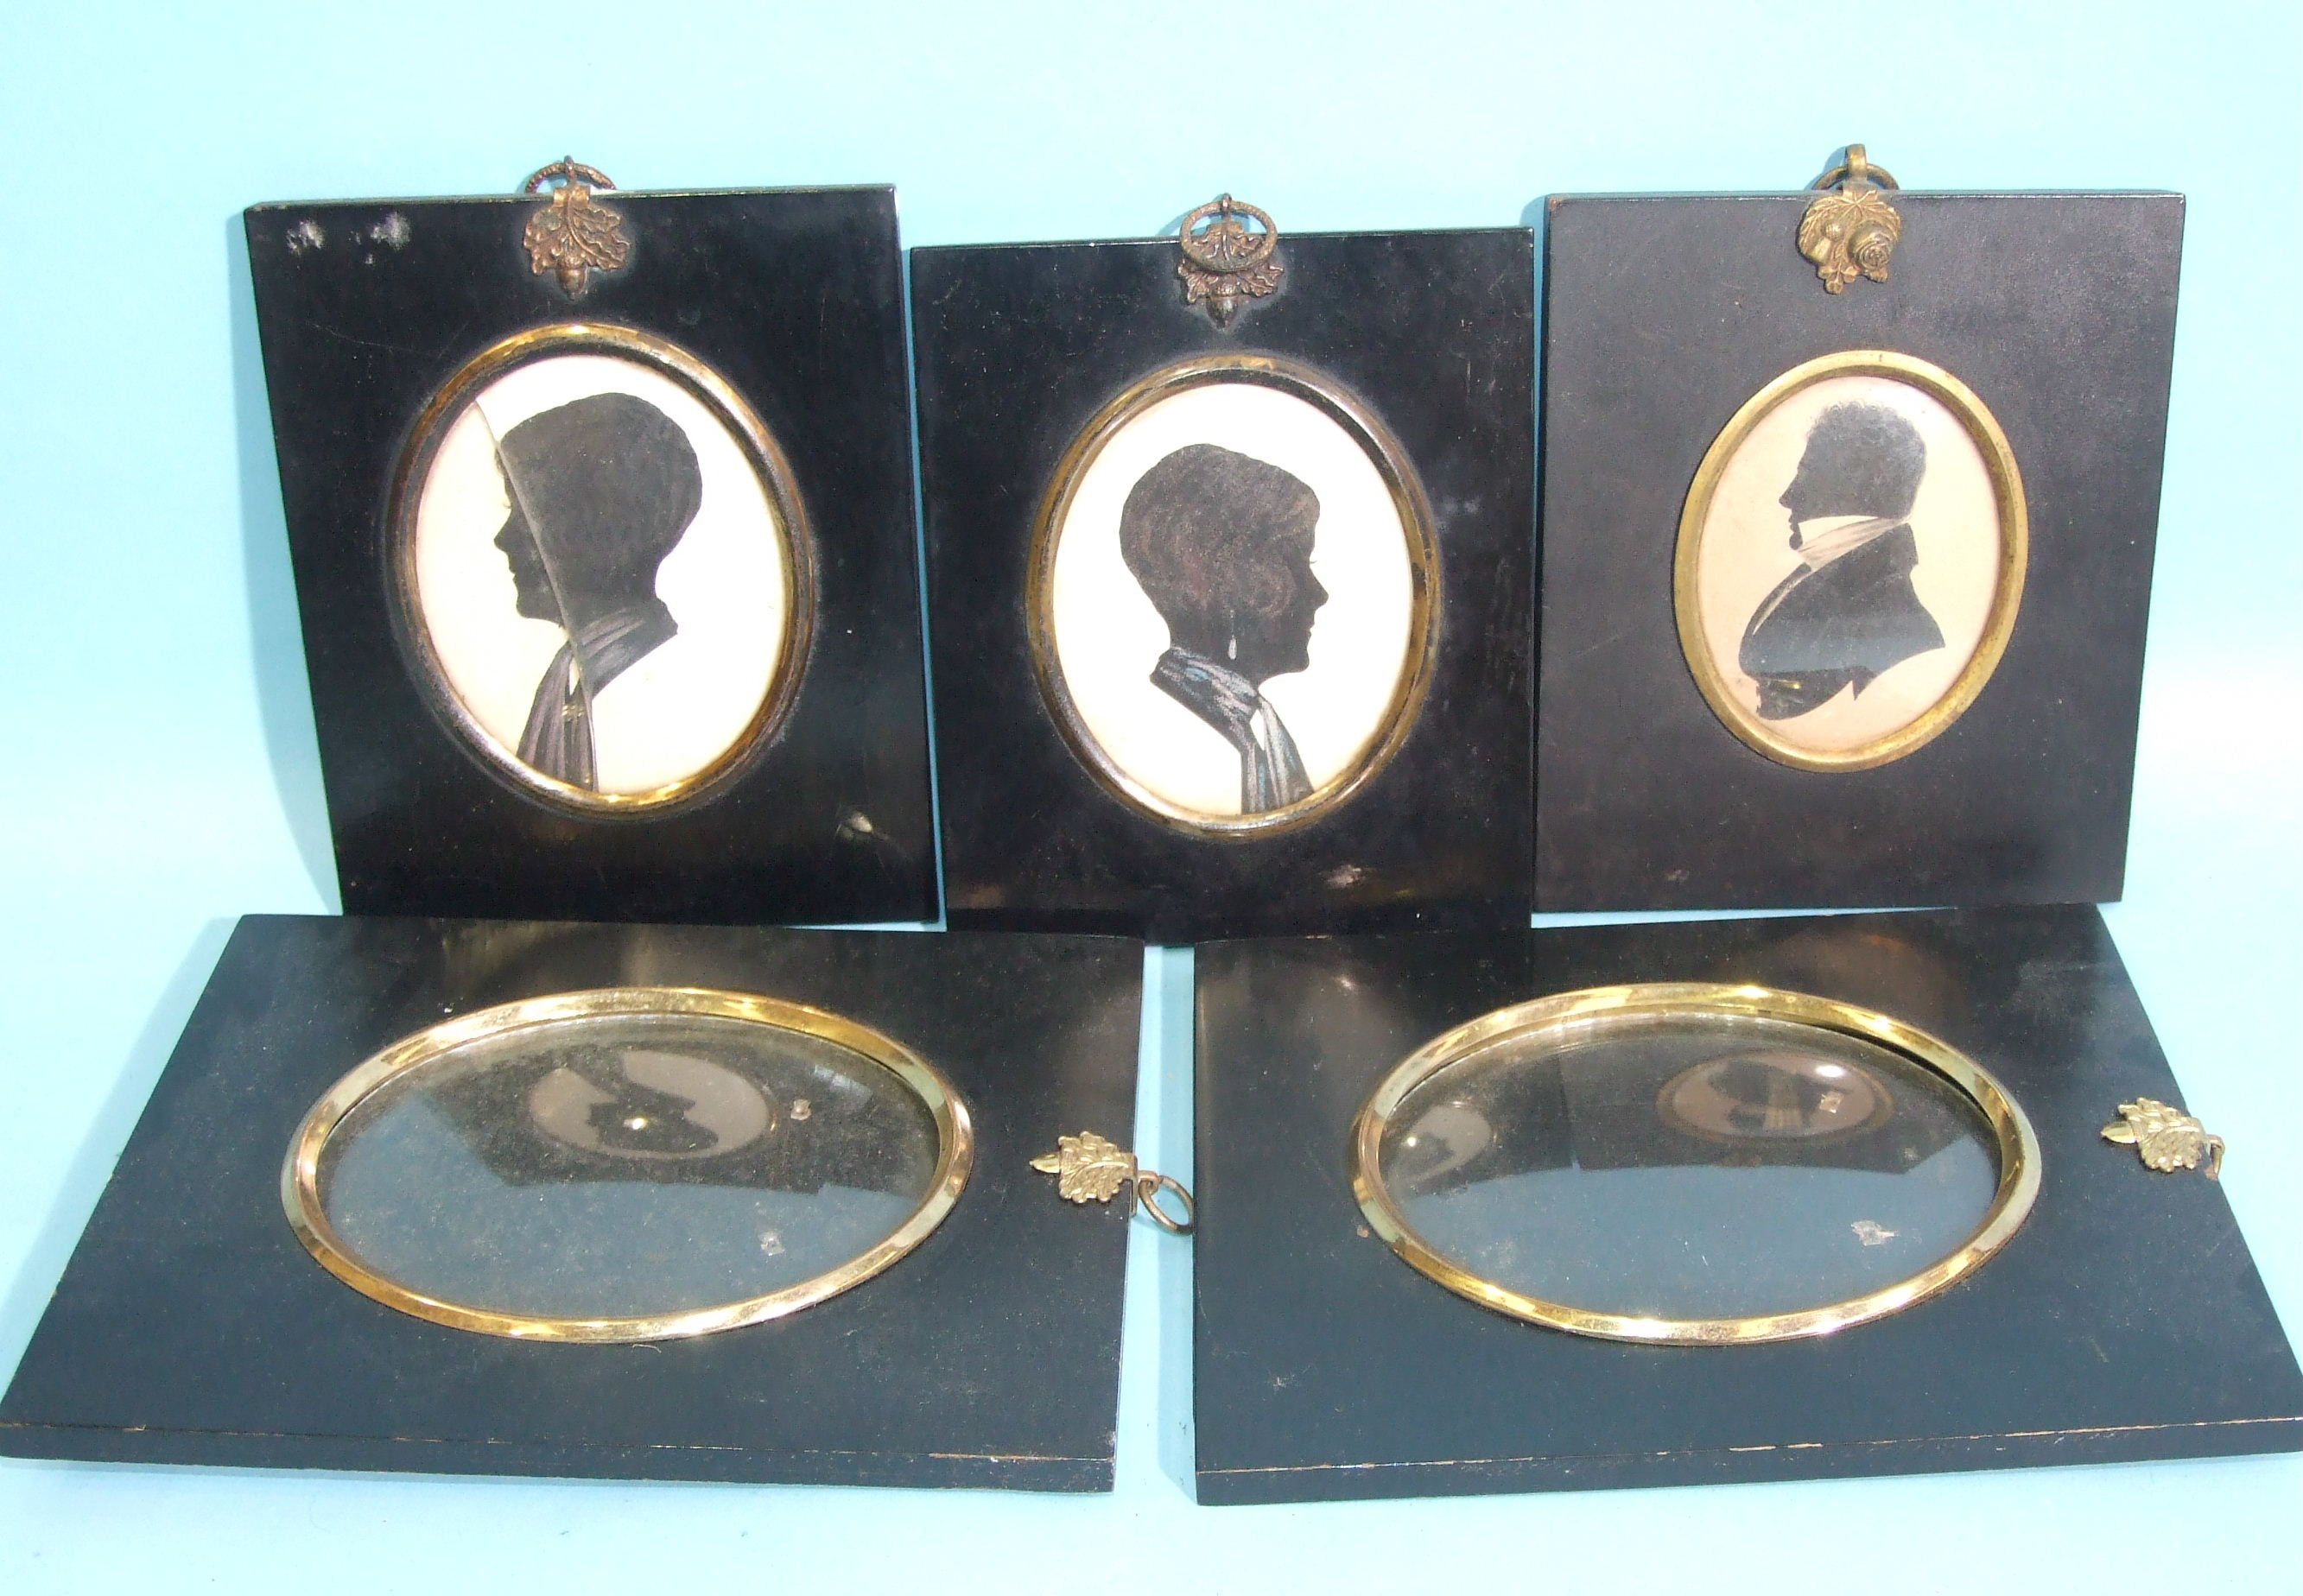 A 19th century silhouette portrait of a gentleman, 7.5 x 6cm, two early-20th century silhouette